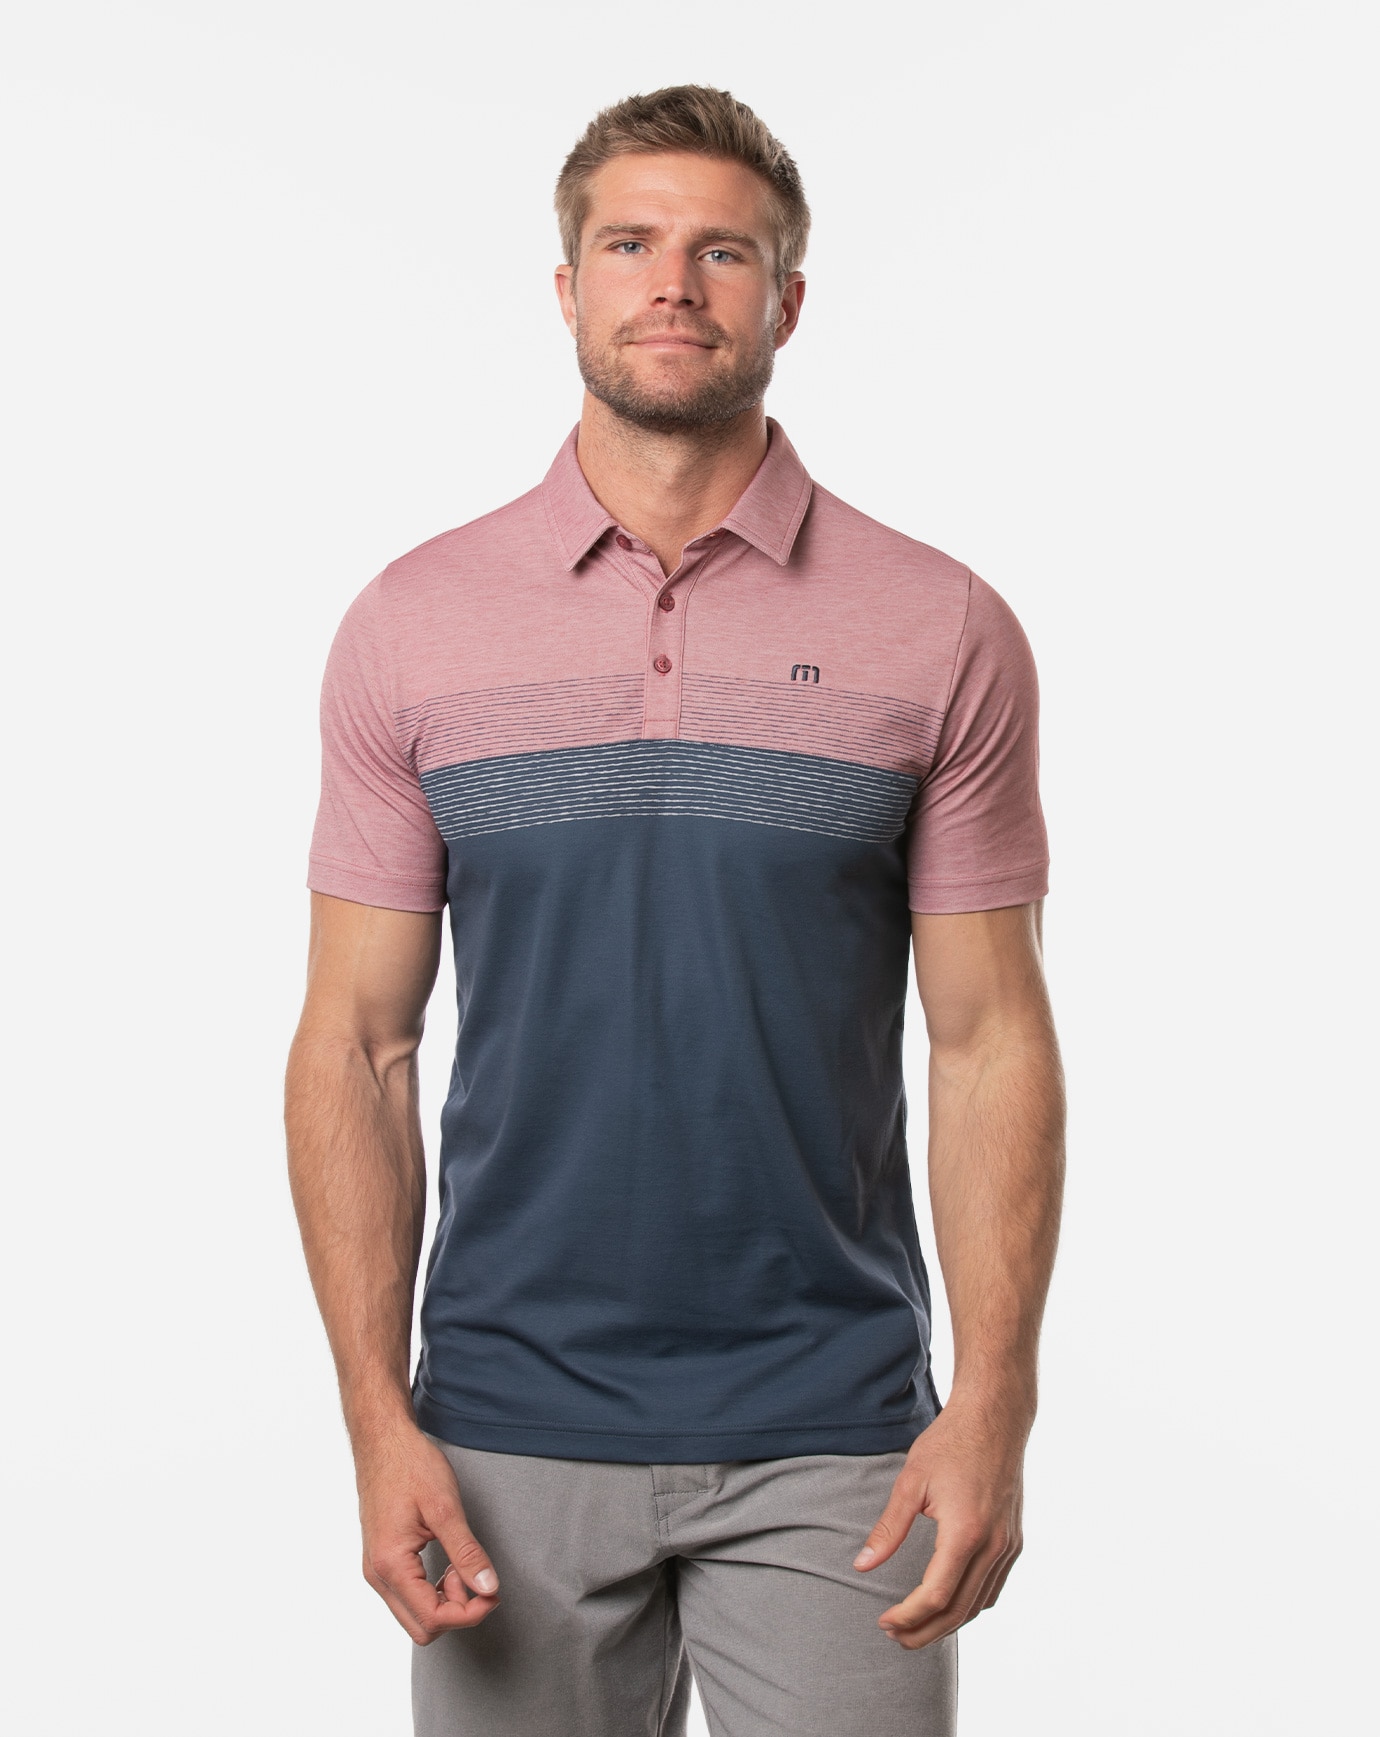 Related Product - LAKE LIFE POLO